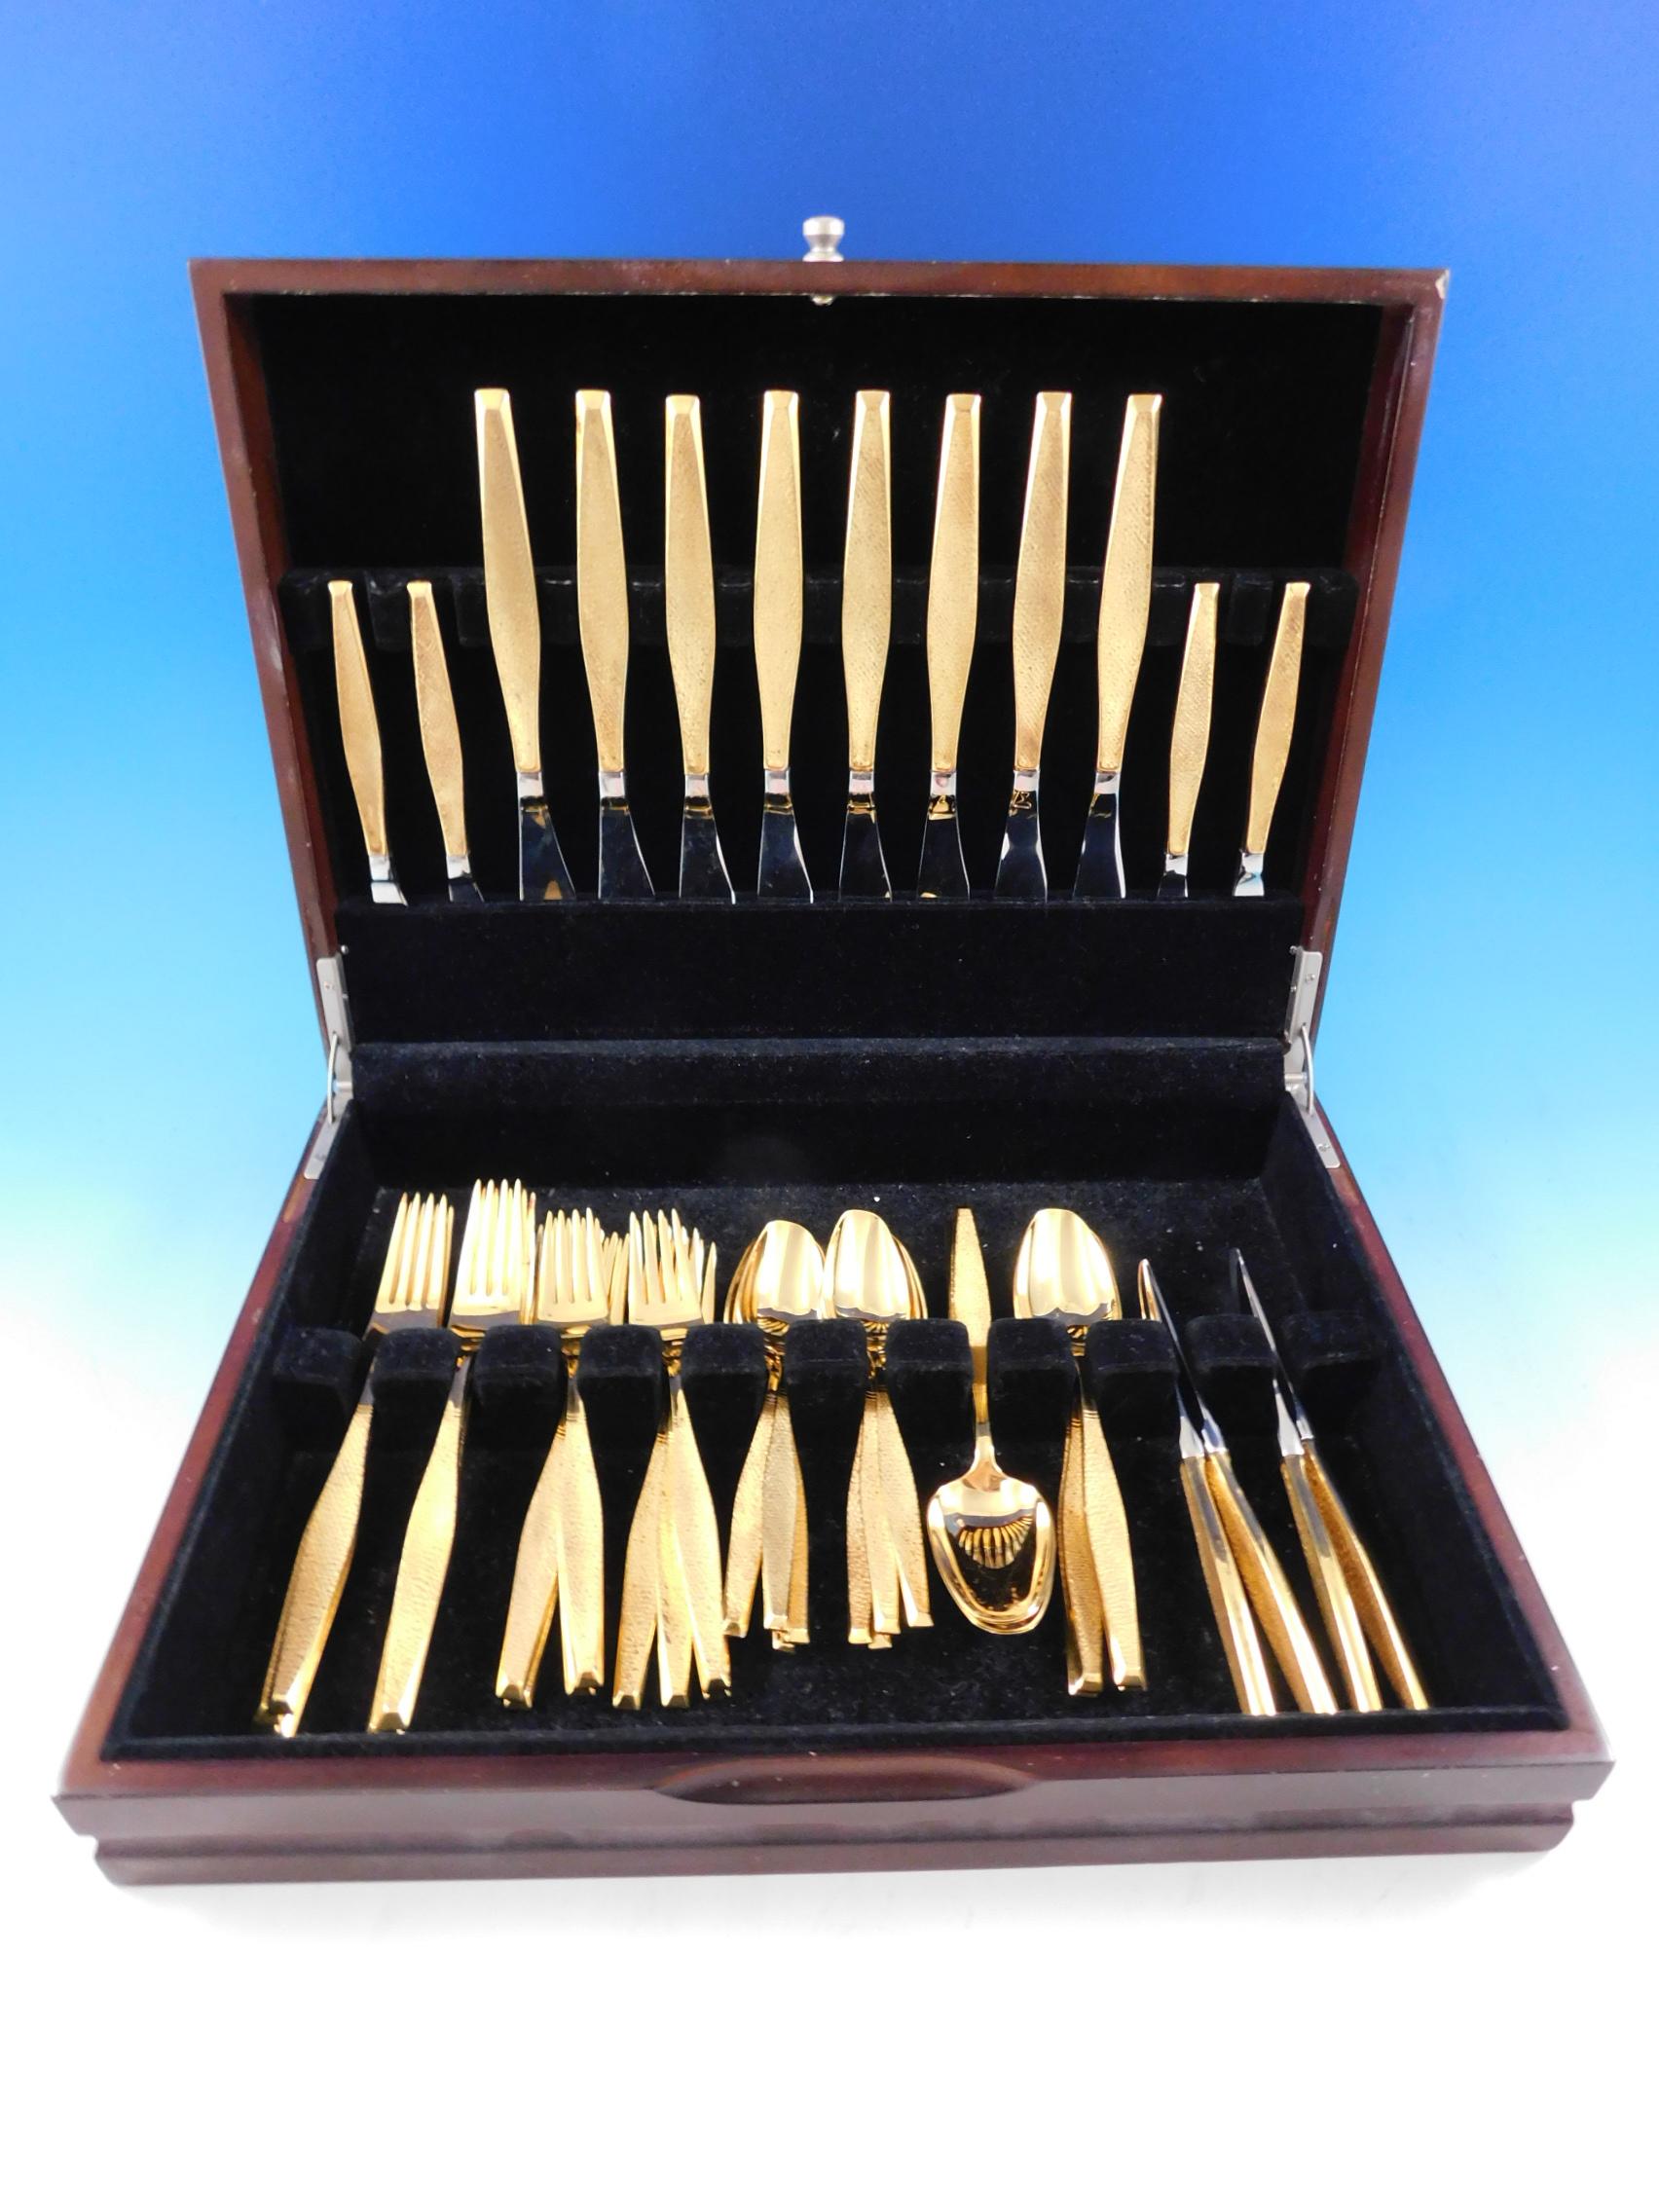 Scarce Mid-Century Modern Golden Damascene by Gorham sterling silver vermeil Flatware set - 48 pieces. This set includes:

8 knives, 9